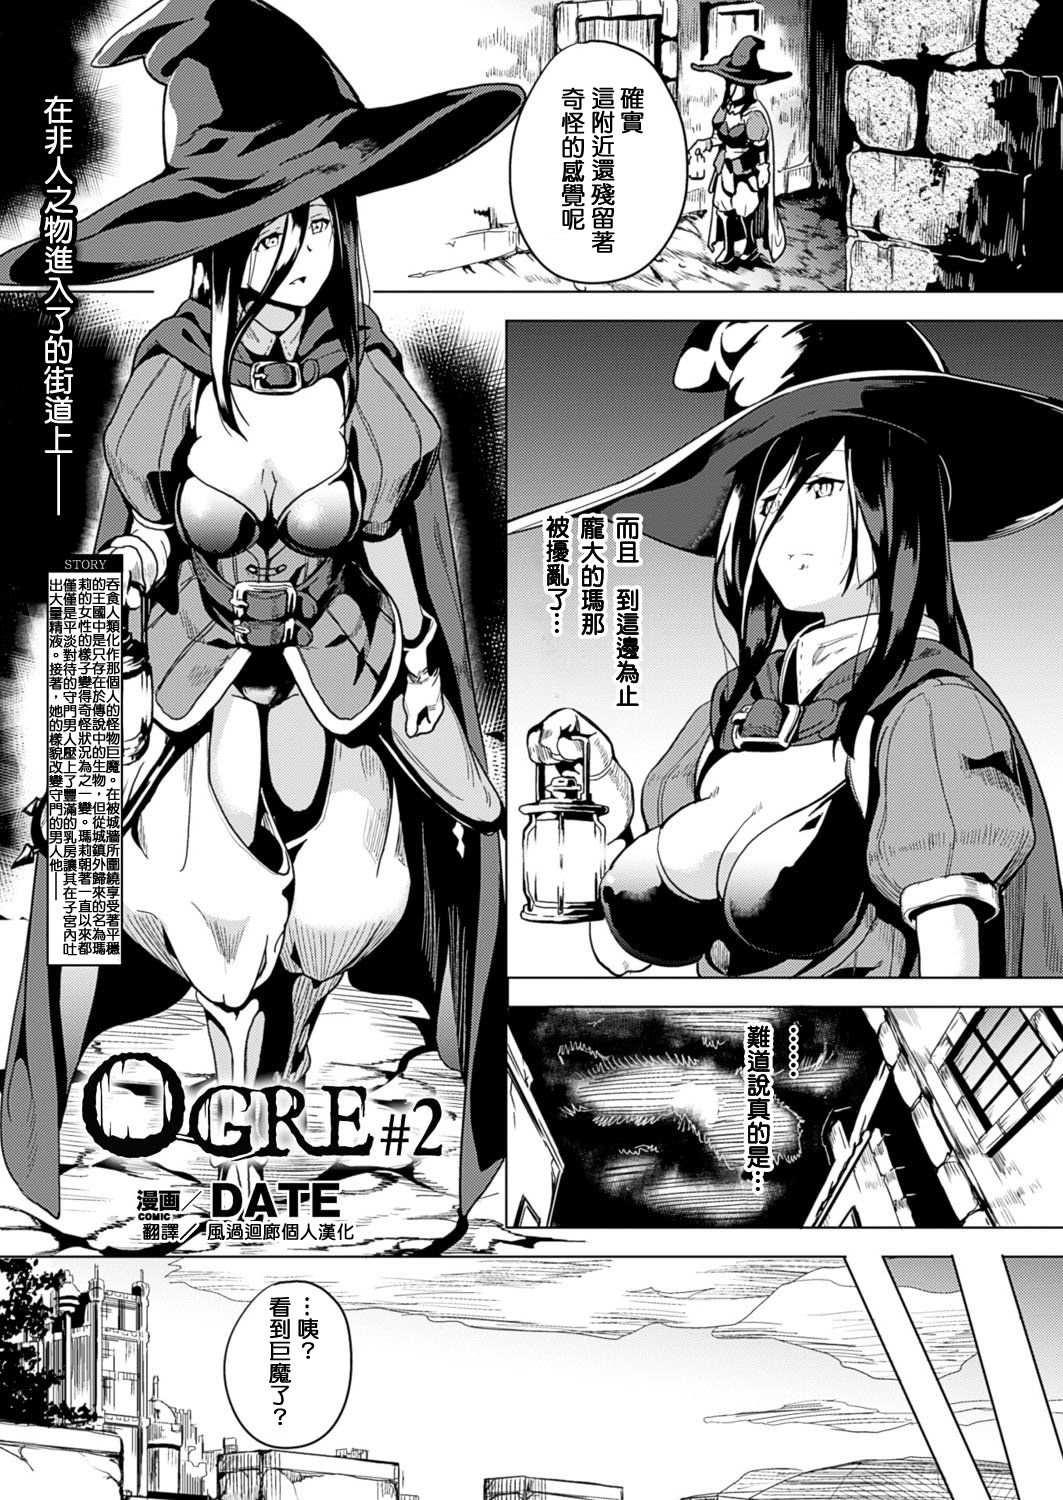 [DATE] OGRE #2 (COMIC Unreal 2016-12 Vol. 64) [Chinese] [風過迴廊個人漢化] [Digital] page 1 full